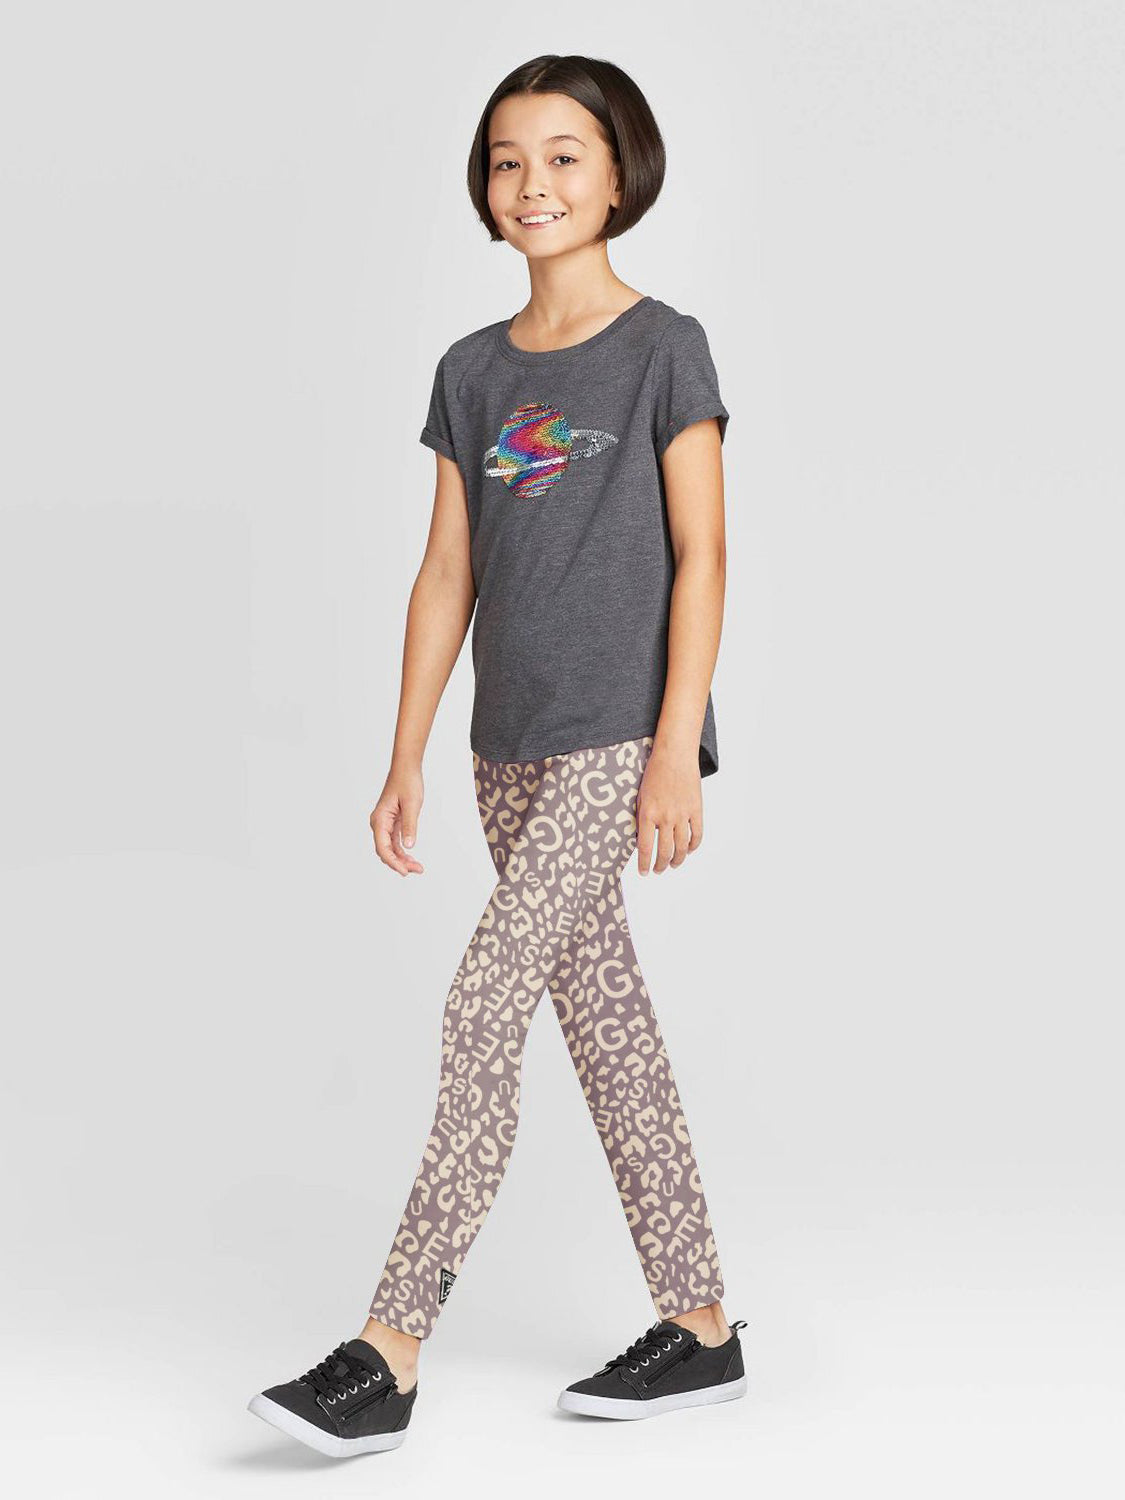 Guess Stylish Tights Leggings For Girls-Dark Tea Pink with Allover Print-SP2103/RT2507